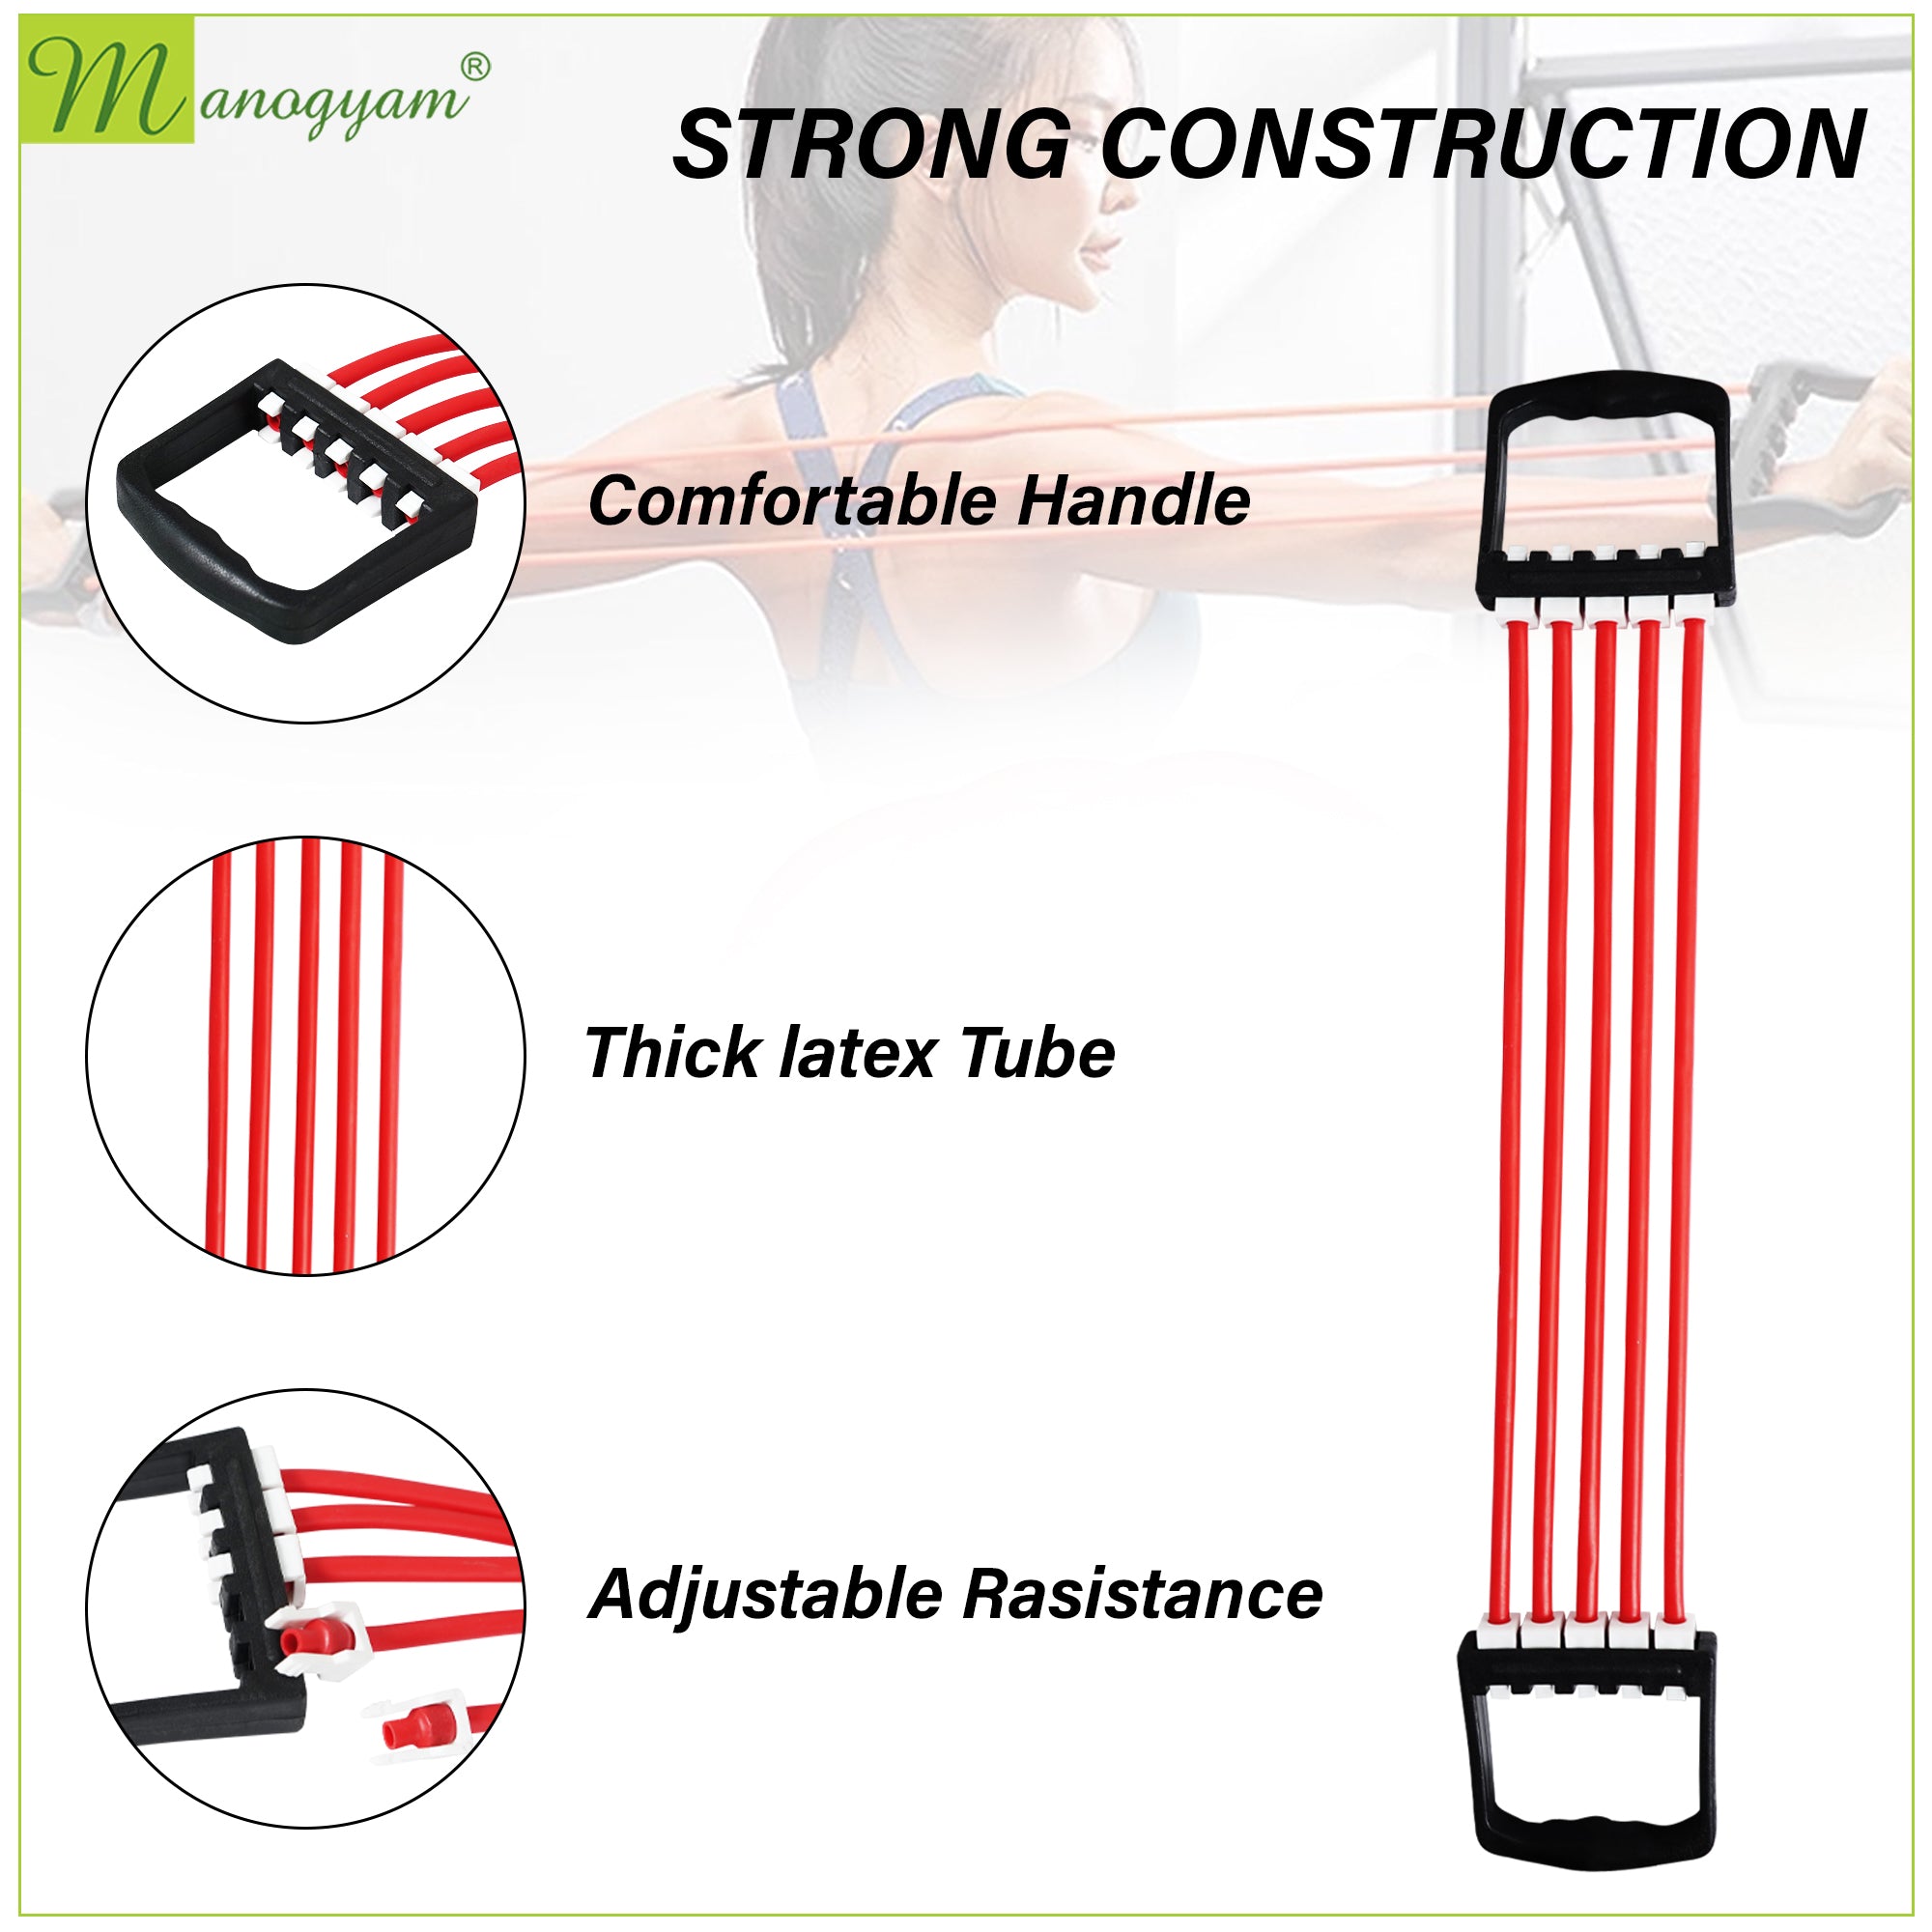 Manogyam 5-Tube Chest Expander: Strengthen Your Chest Muscles with Our Band